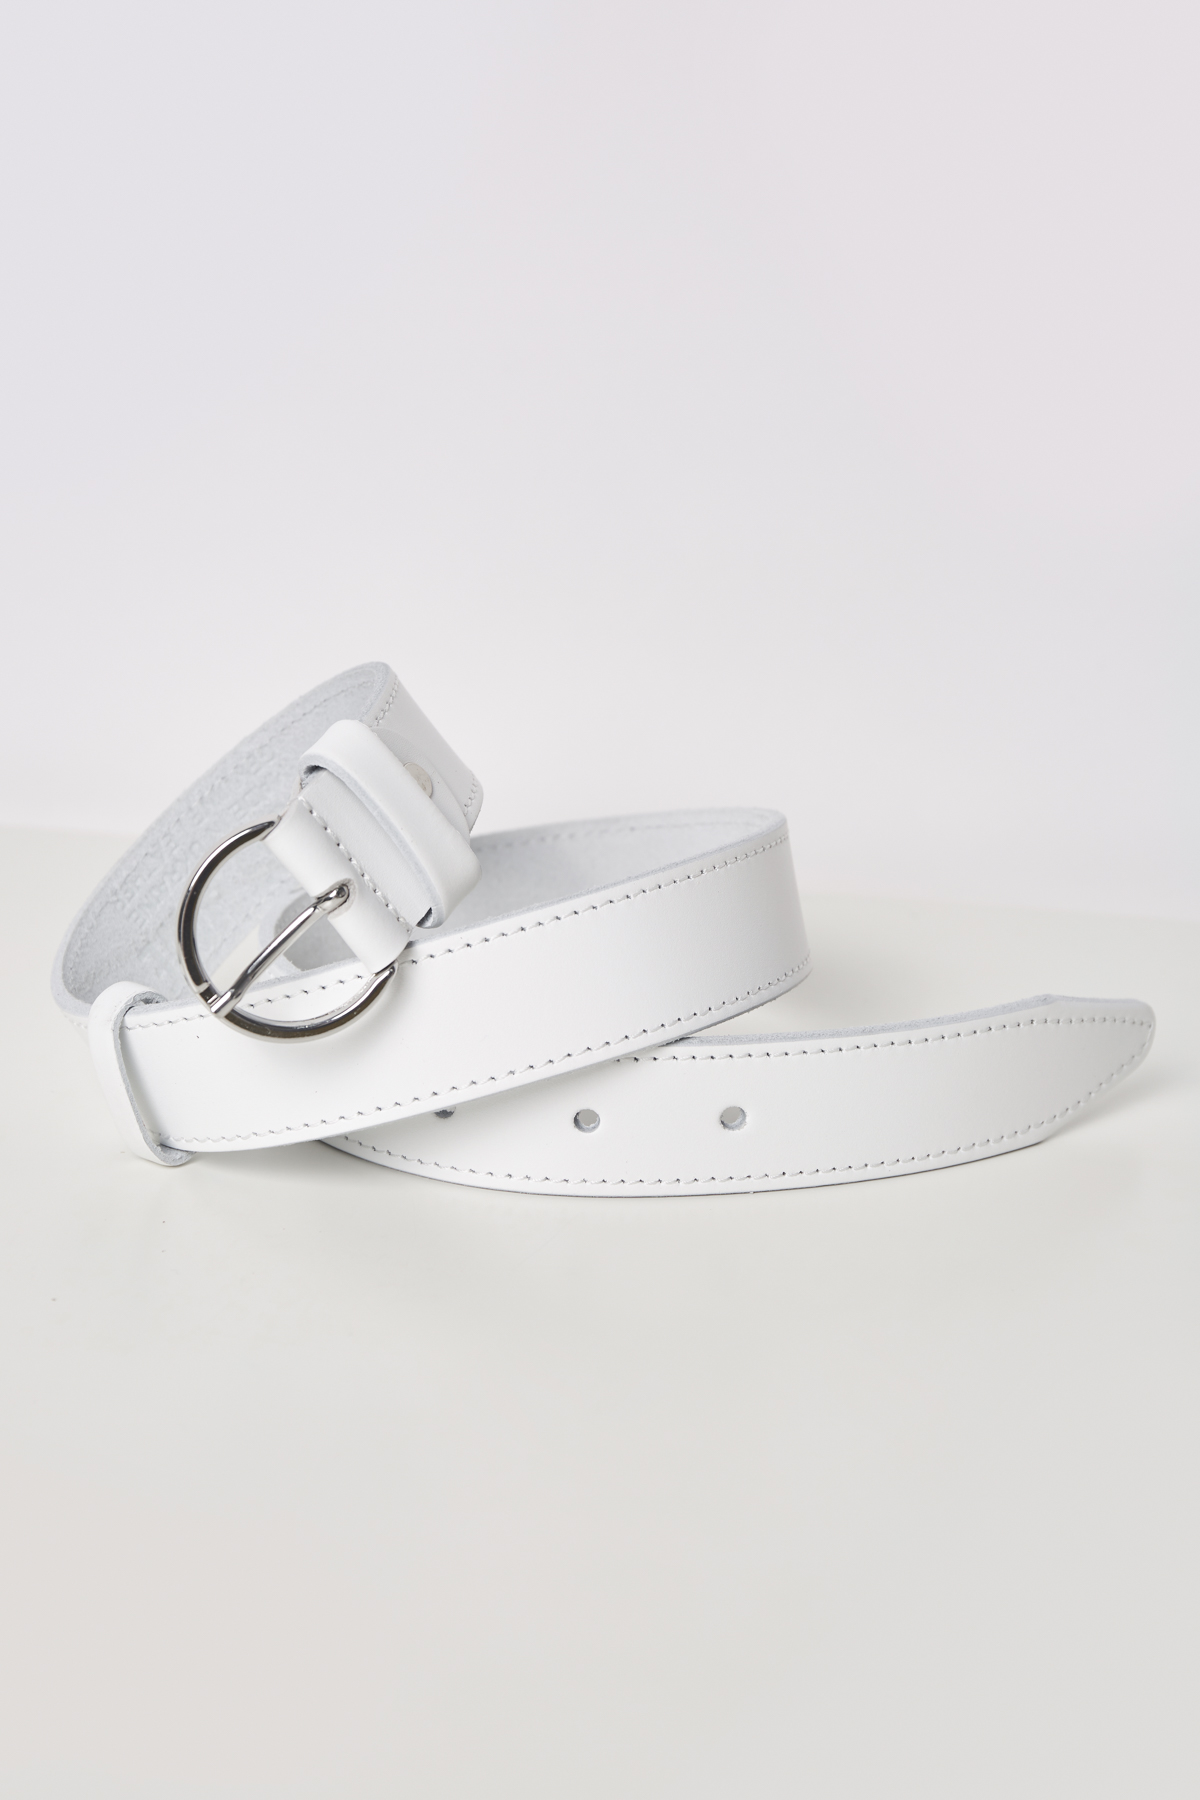 White leather belt with round buckle, photo 1